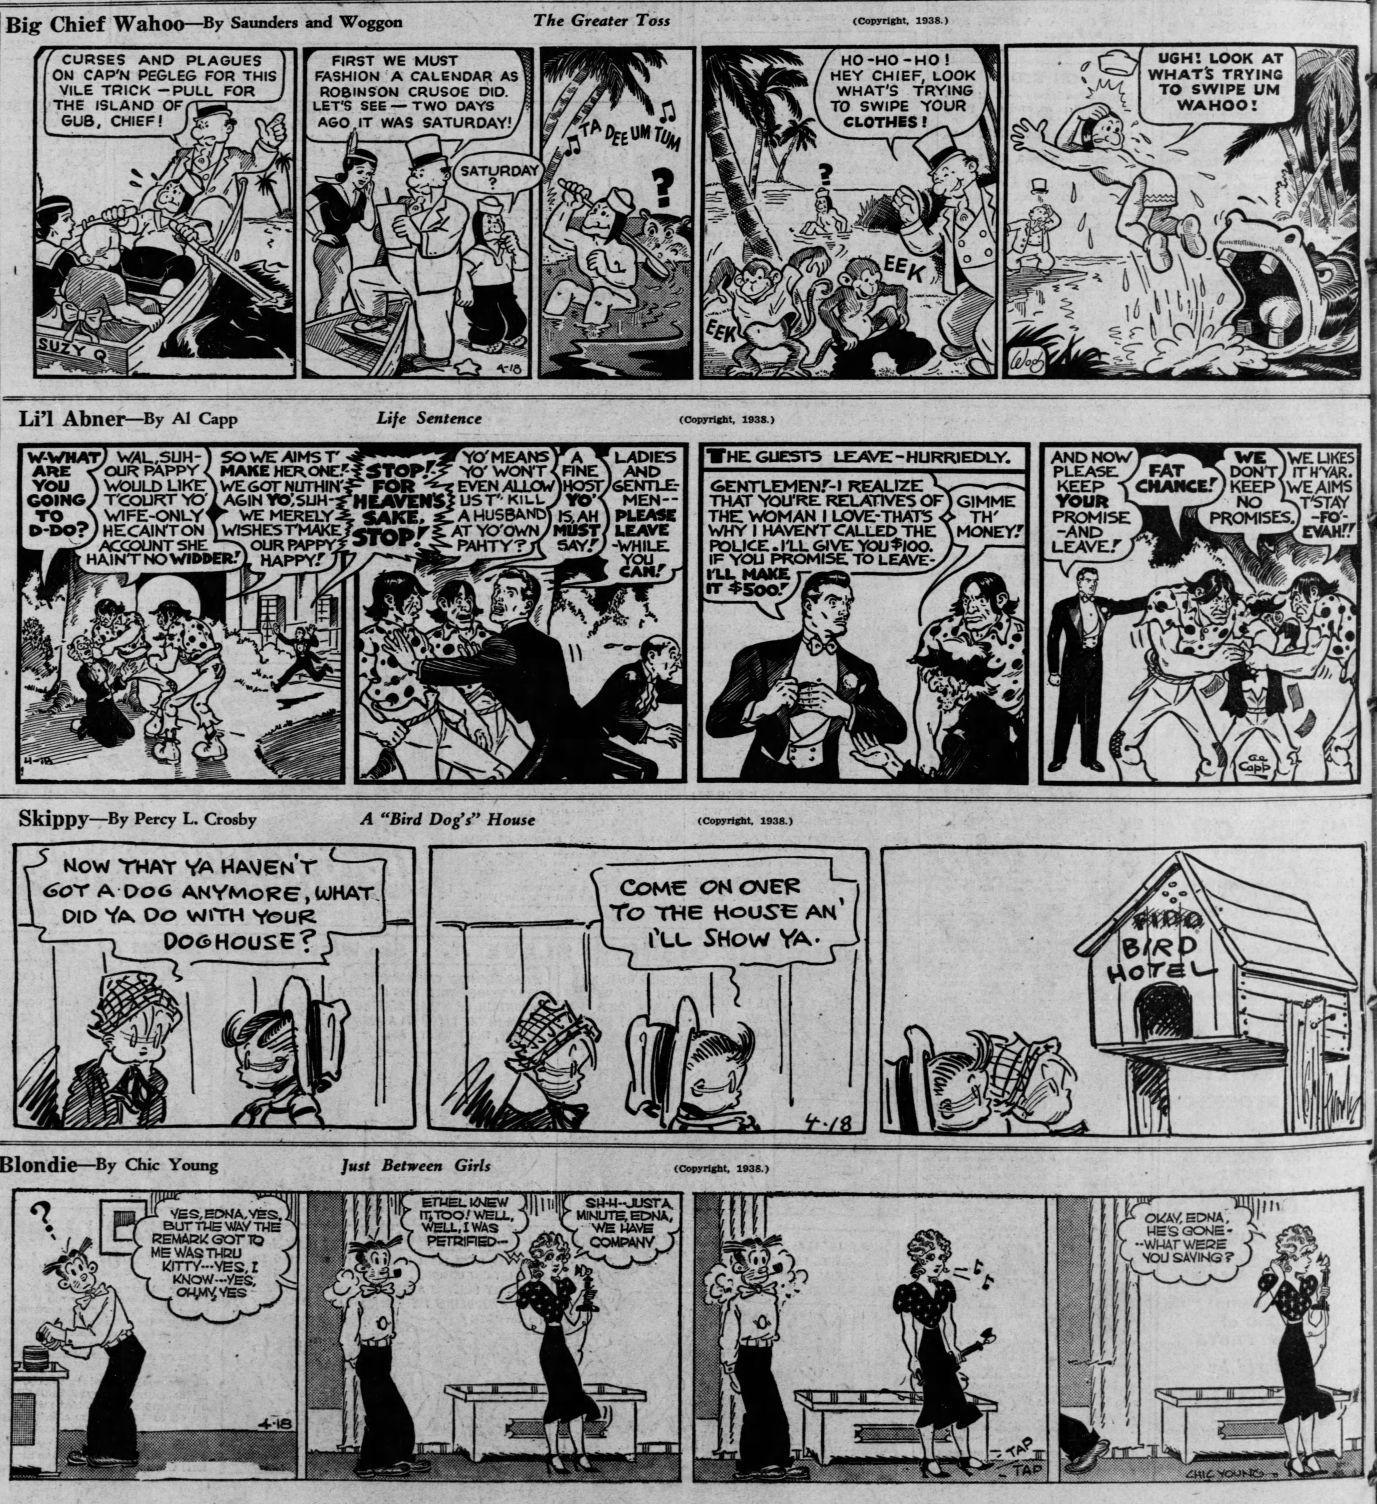 Take a journey through 100 years of Post-Dispatch comics